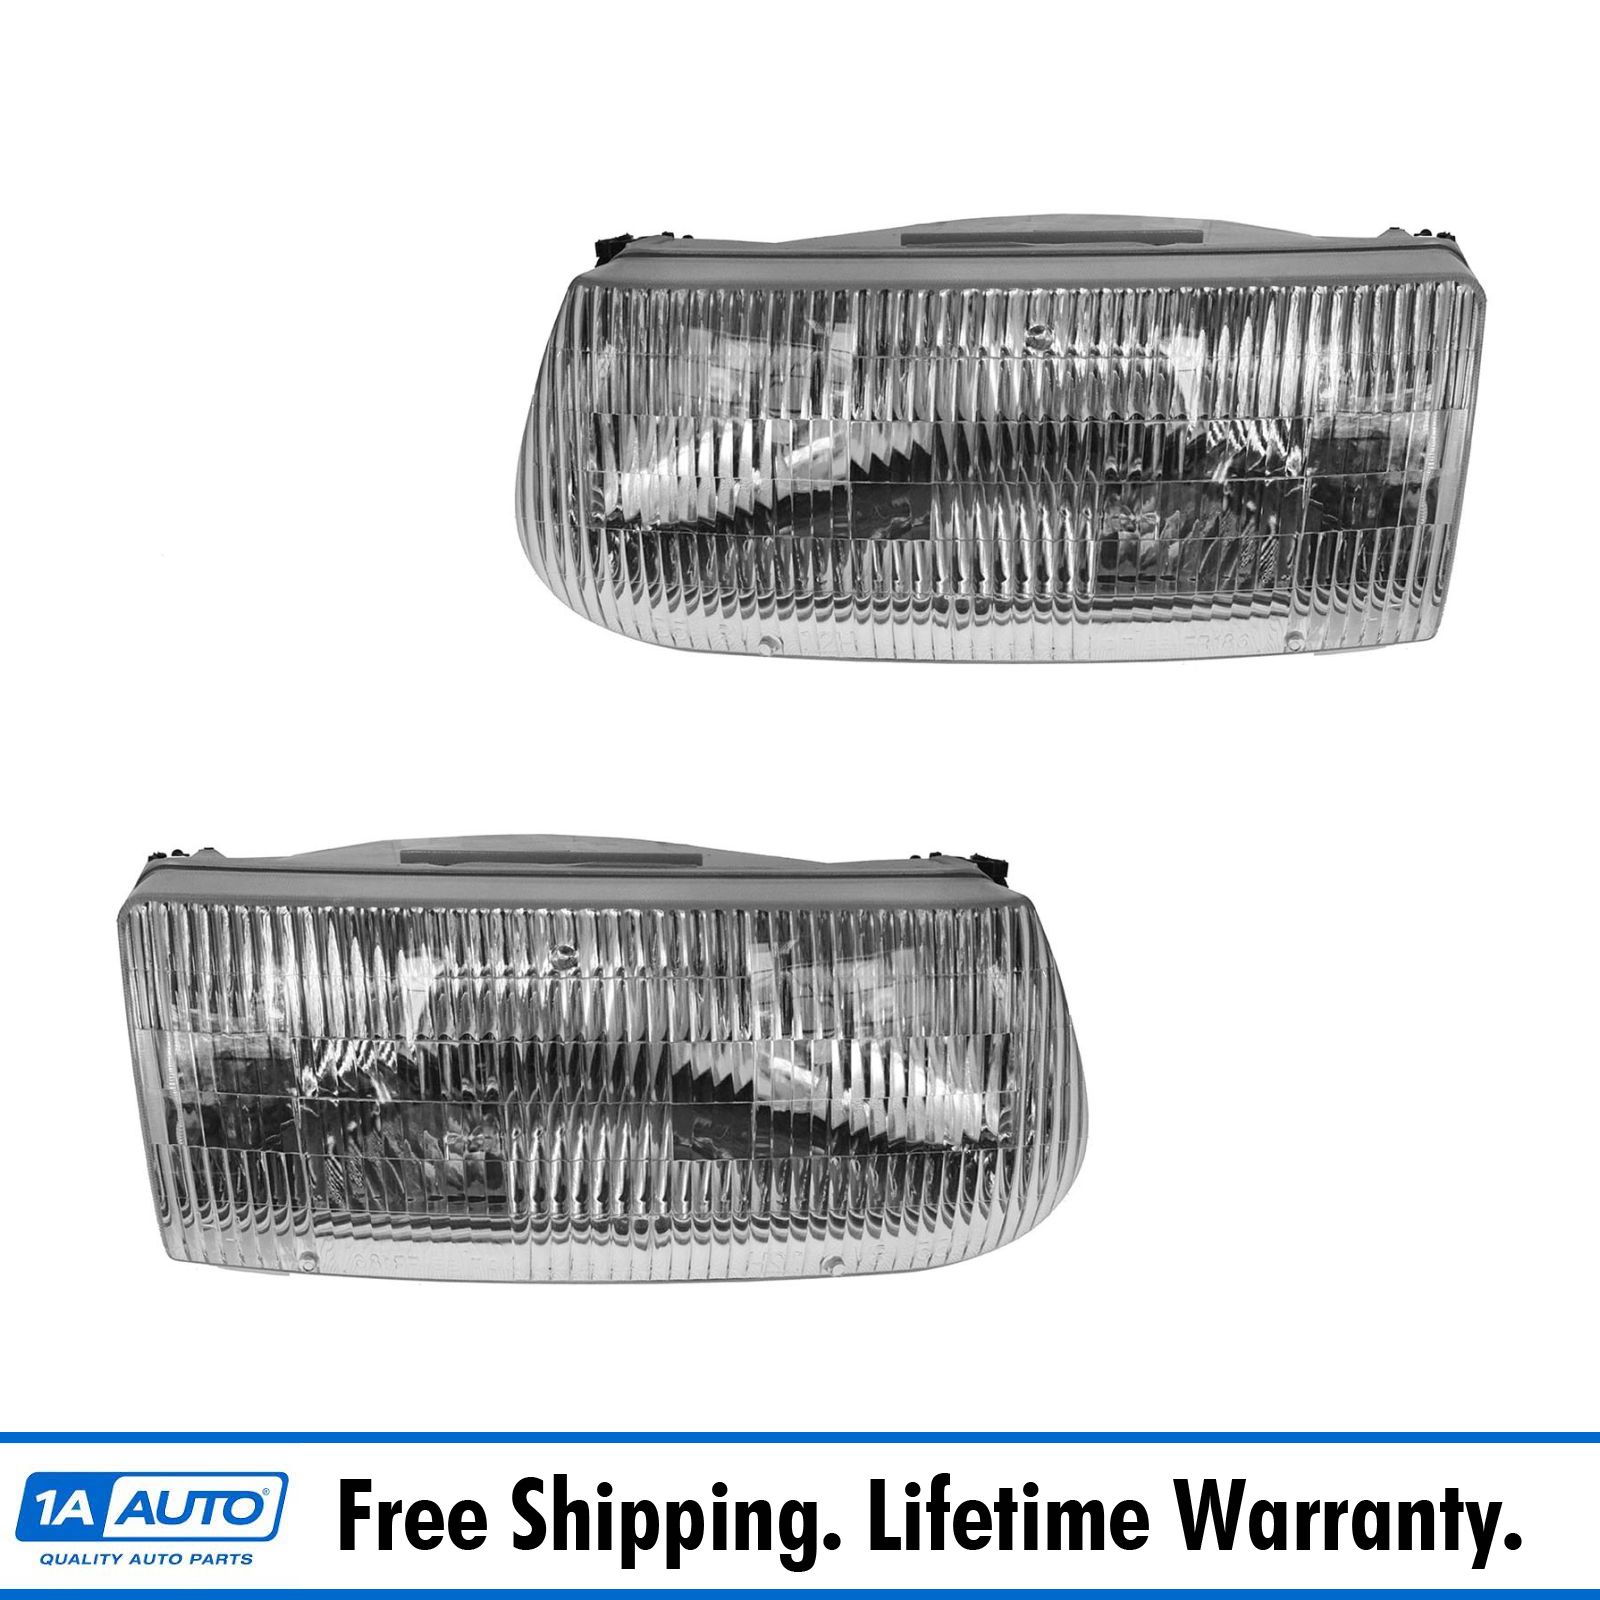 Ford Explorer Mercury Mountaineer Set of Fog Lights Lamps Bumper Mounted